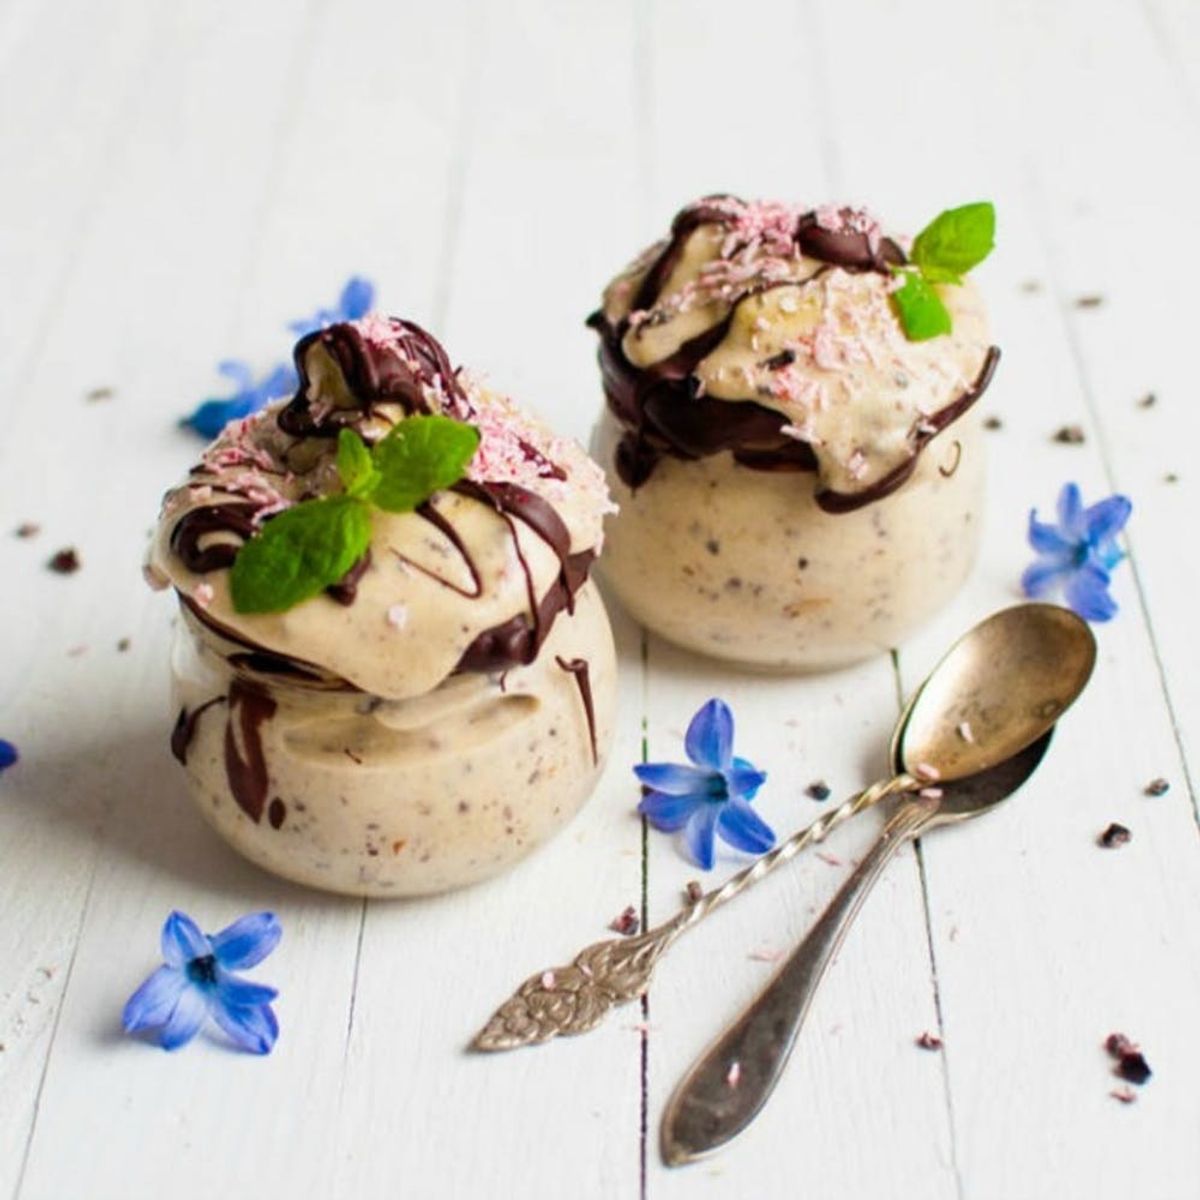 Chill Out With These 15 Vegan-Friendly Frozen Treats